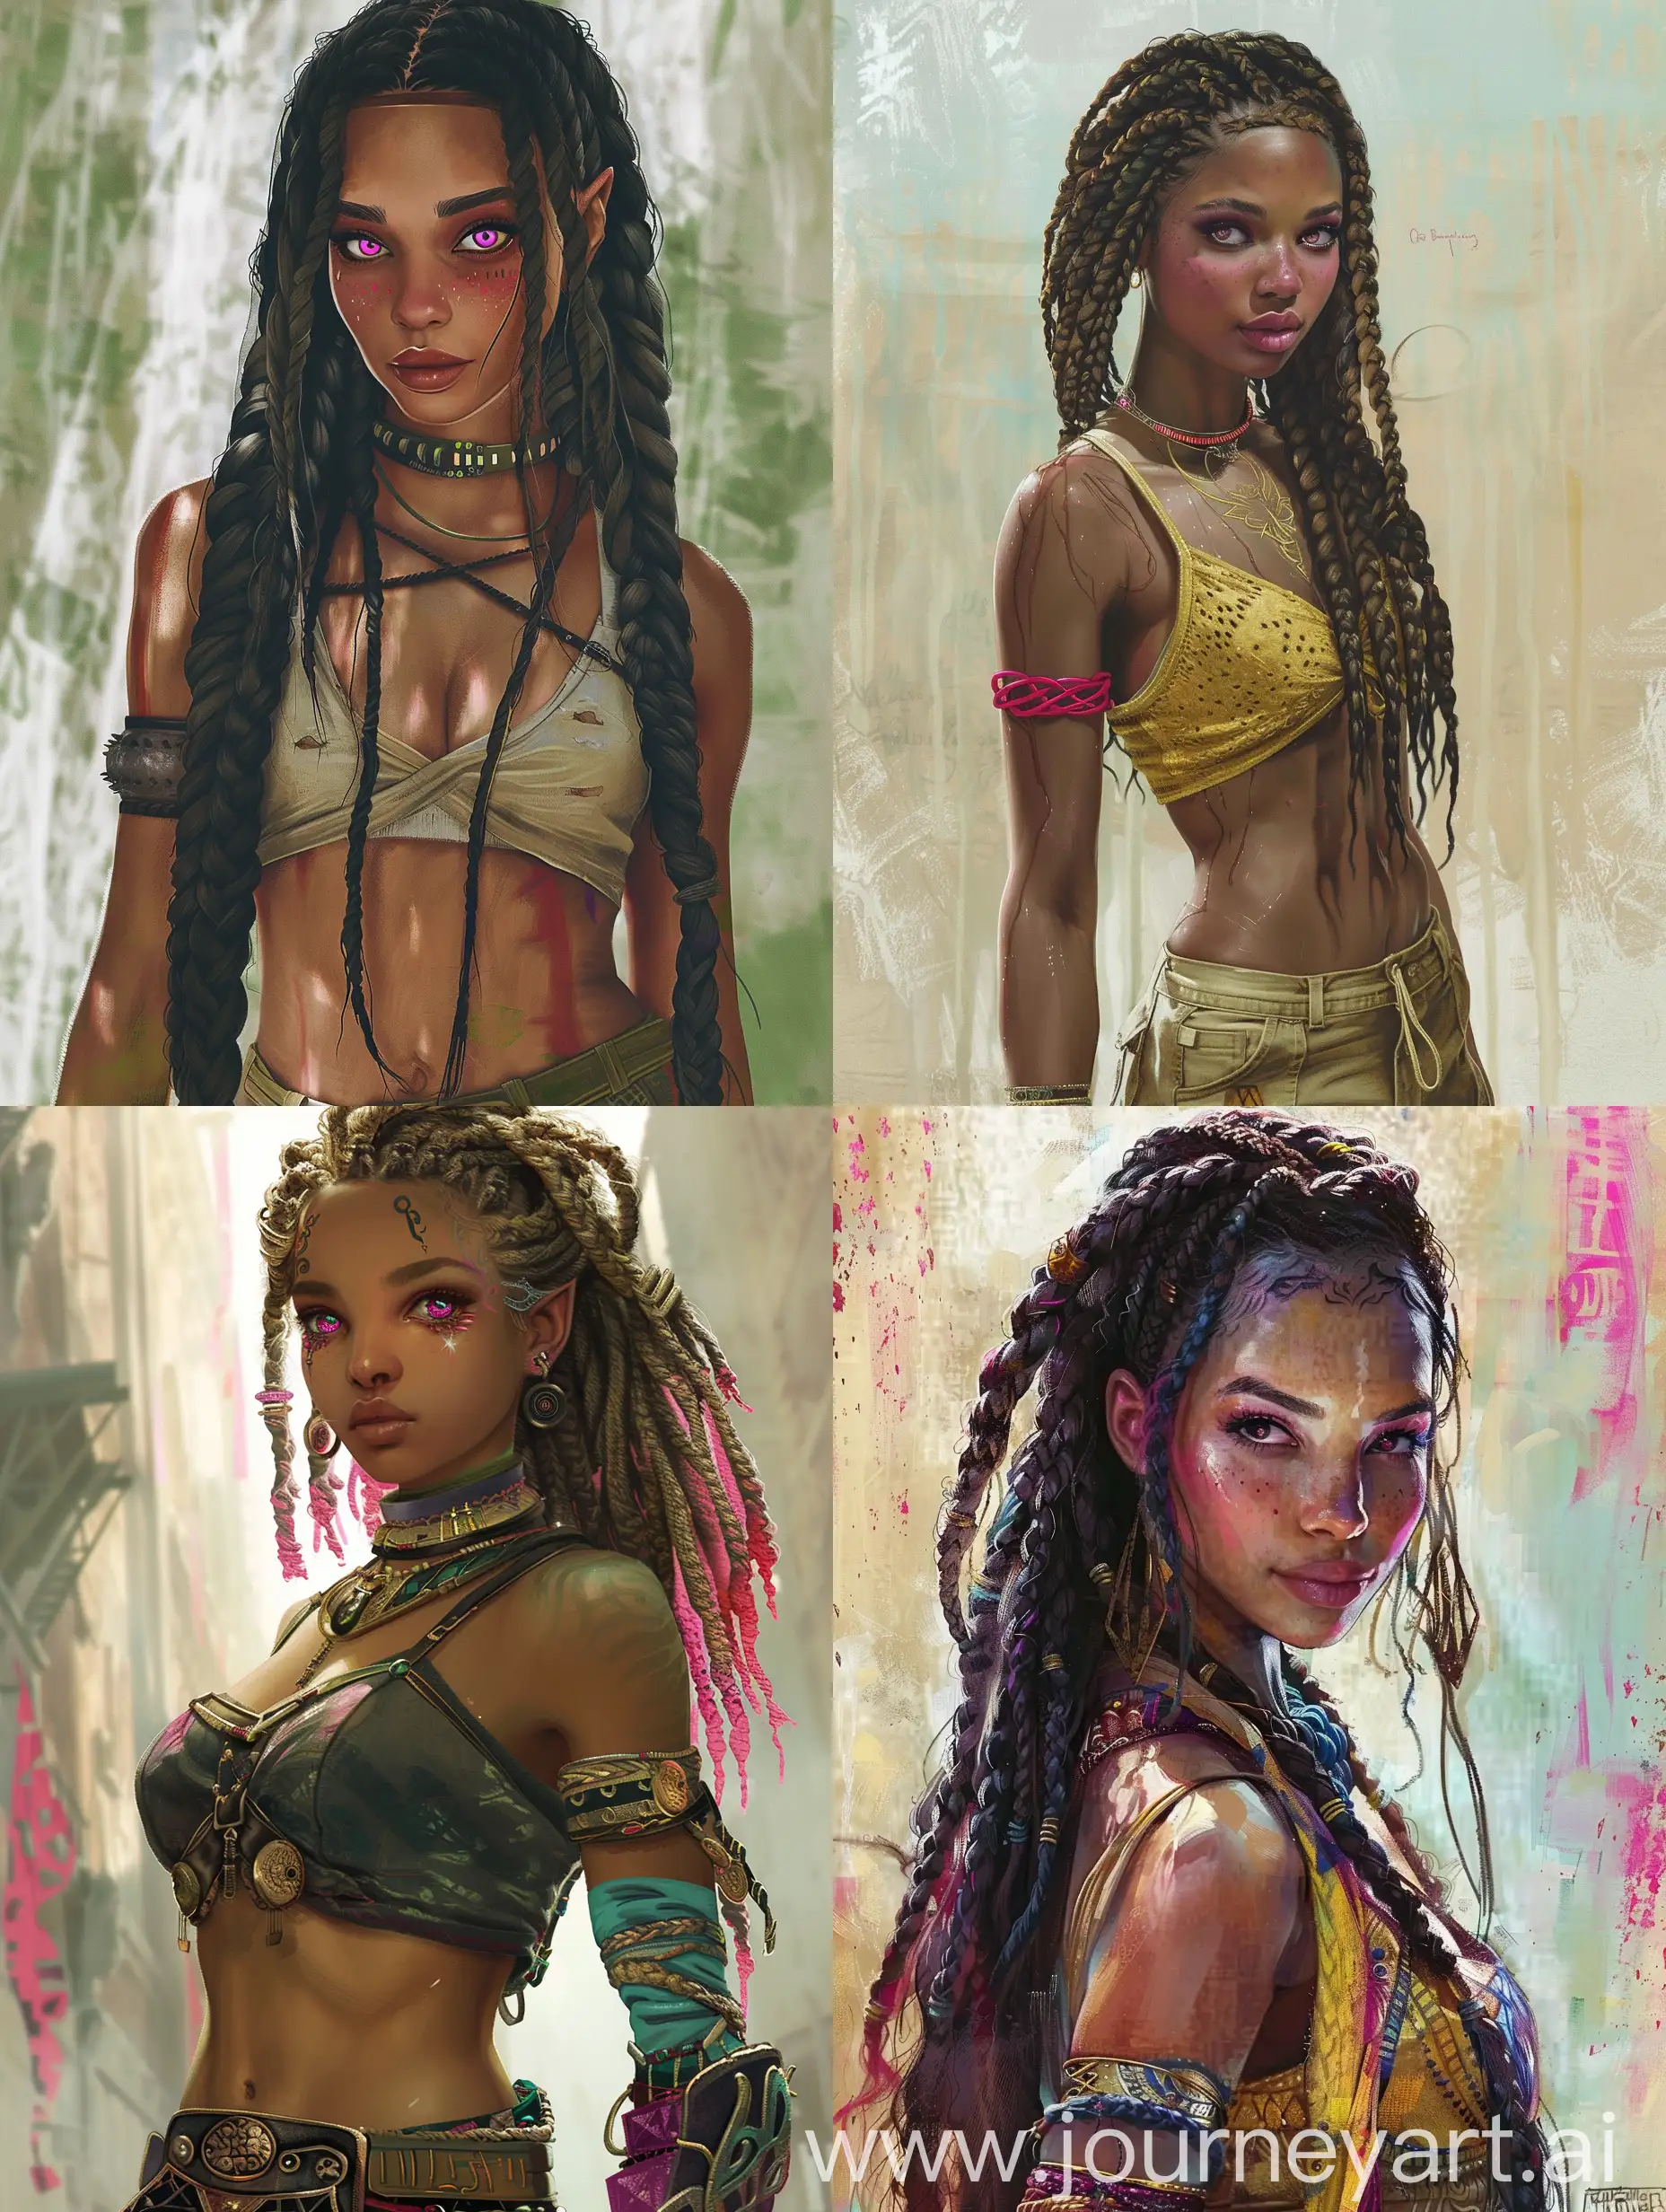 Starting point of details; imagination and fantasy brought to life through ai creativity, megapixels, painting, photo realism, waist up wide shots, intricate immense details bringing characters of story to life.  

Subject details 1; a demigoddess of African heritage.   

Subject details 2; tall beautiful, braided hair pink eyes. 

Detail style and color; detailed paiting by gaston bussiere, craig mullins, Impressionism, impasto, baroque, impressionist, mythological oil painting watercolor painting, -- iw 1.6